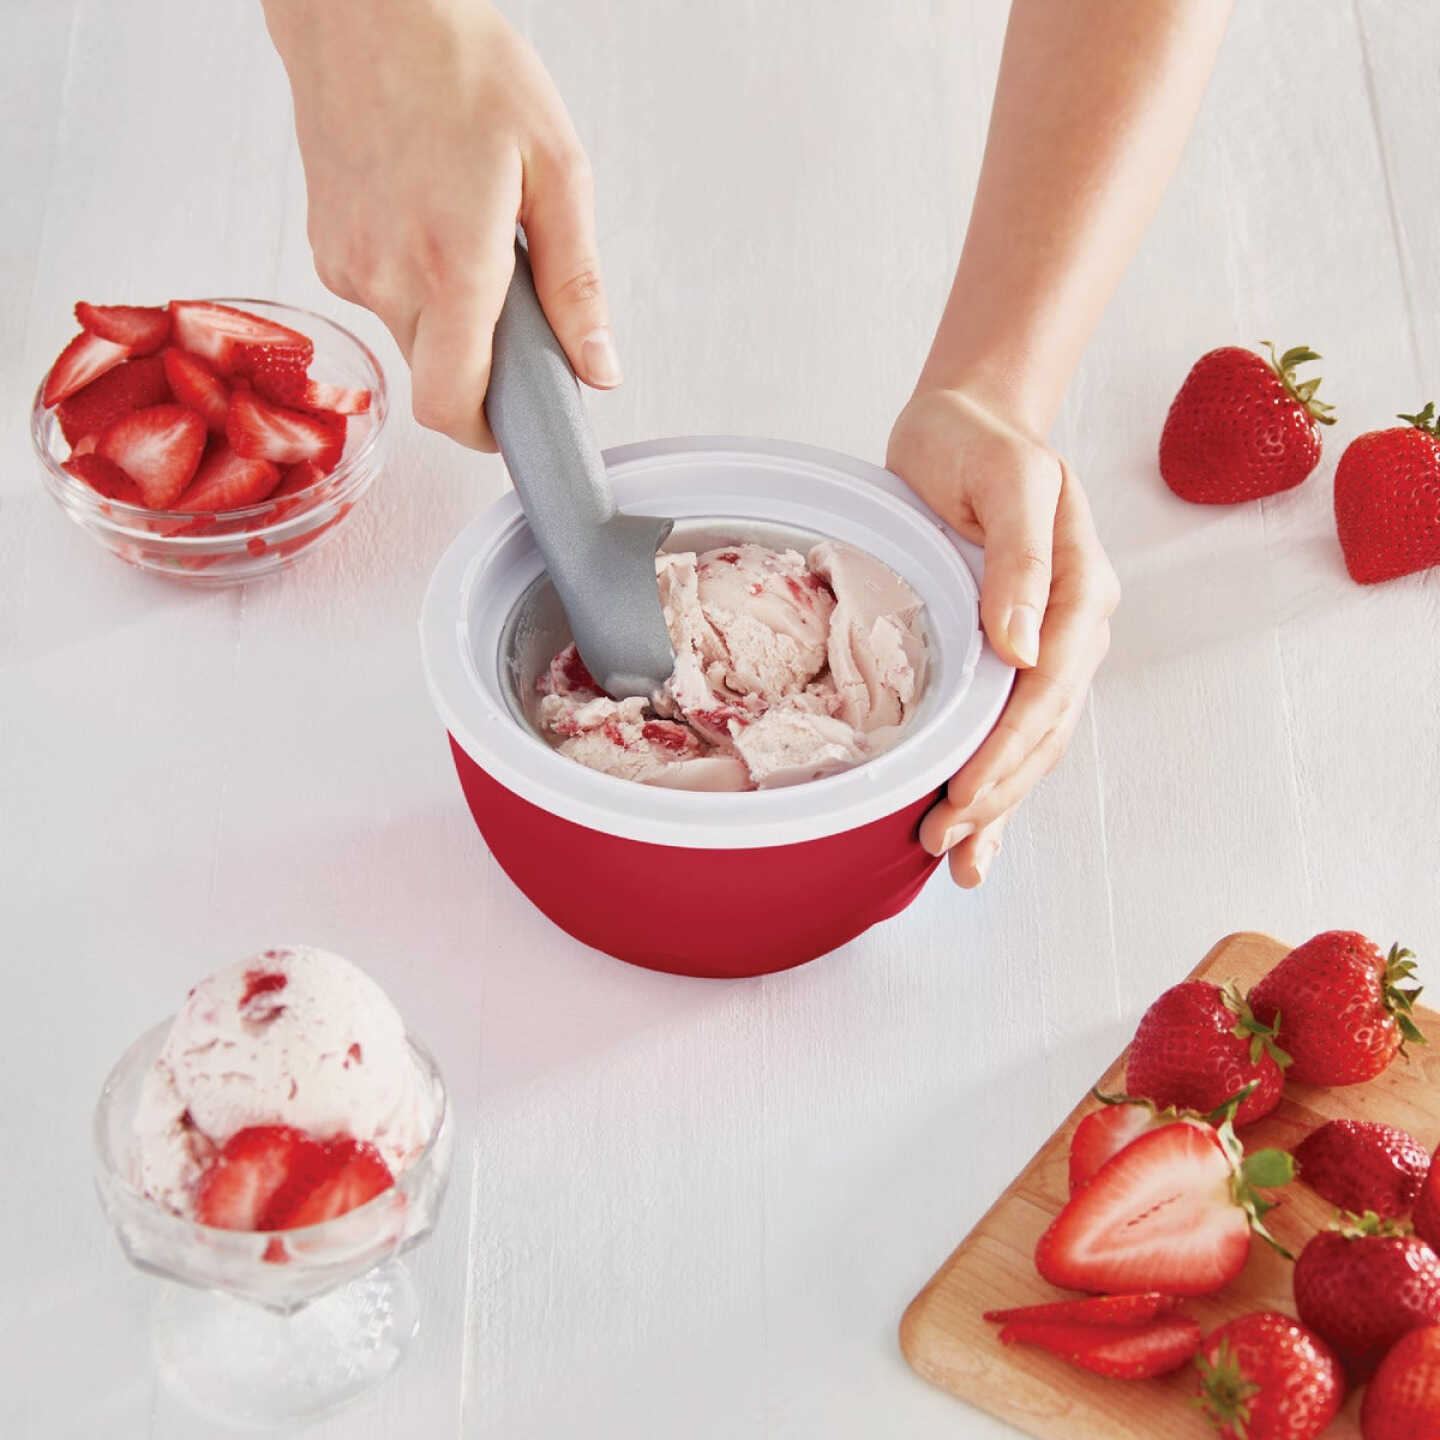 Rise By Dash Personal Electric Ice Cream Maker - Power Townsend